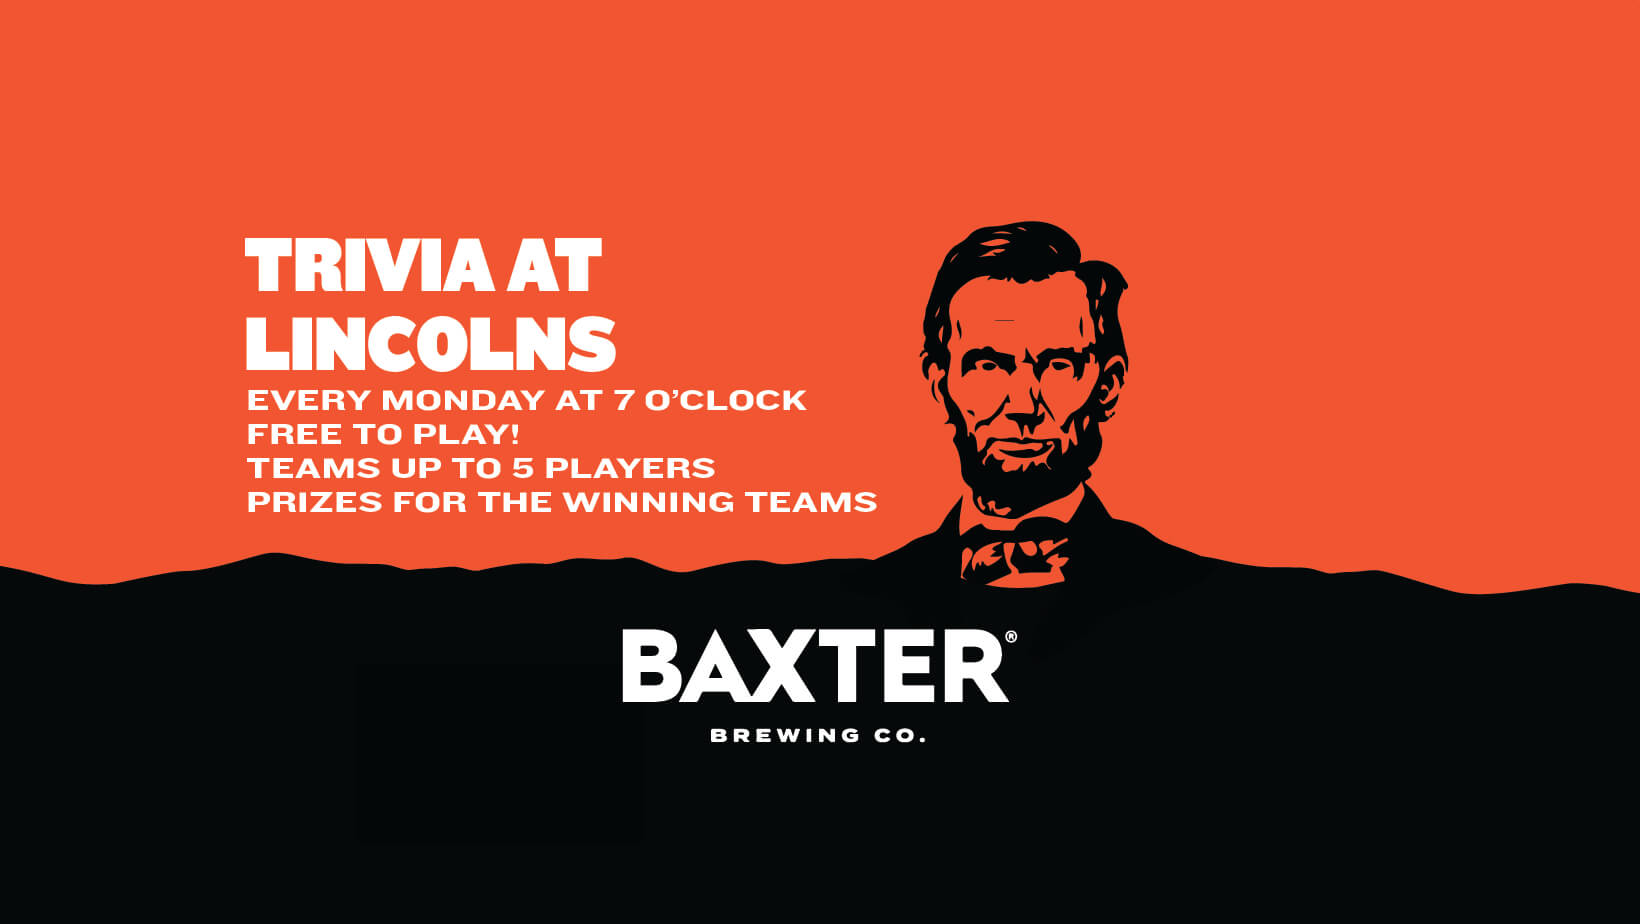 Image promoting trivia at Lincolns every Monday